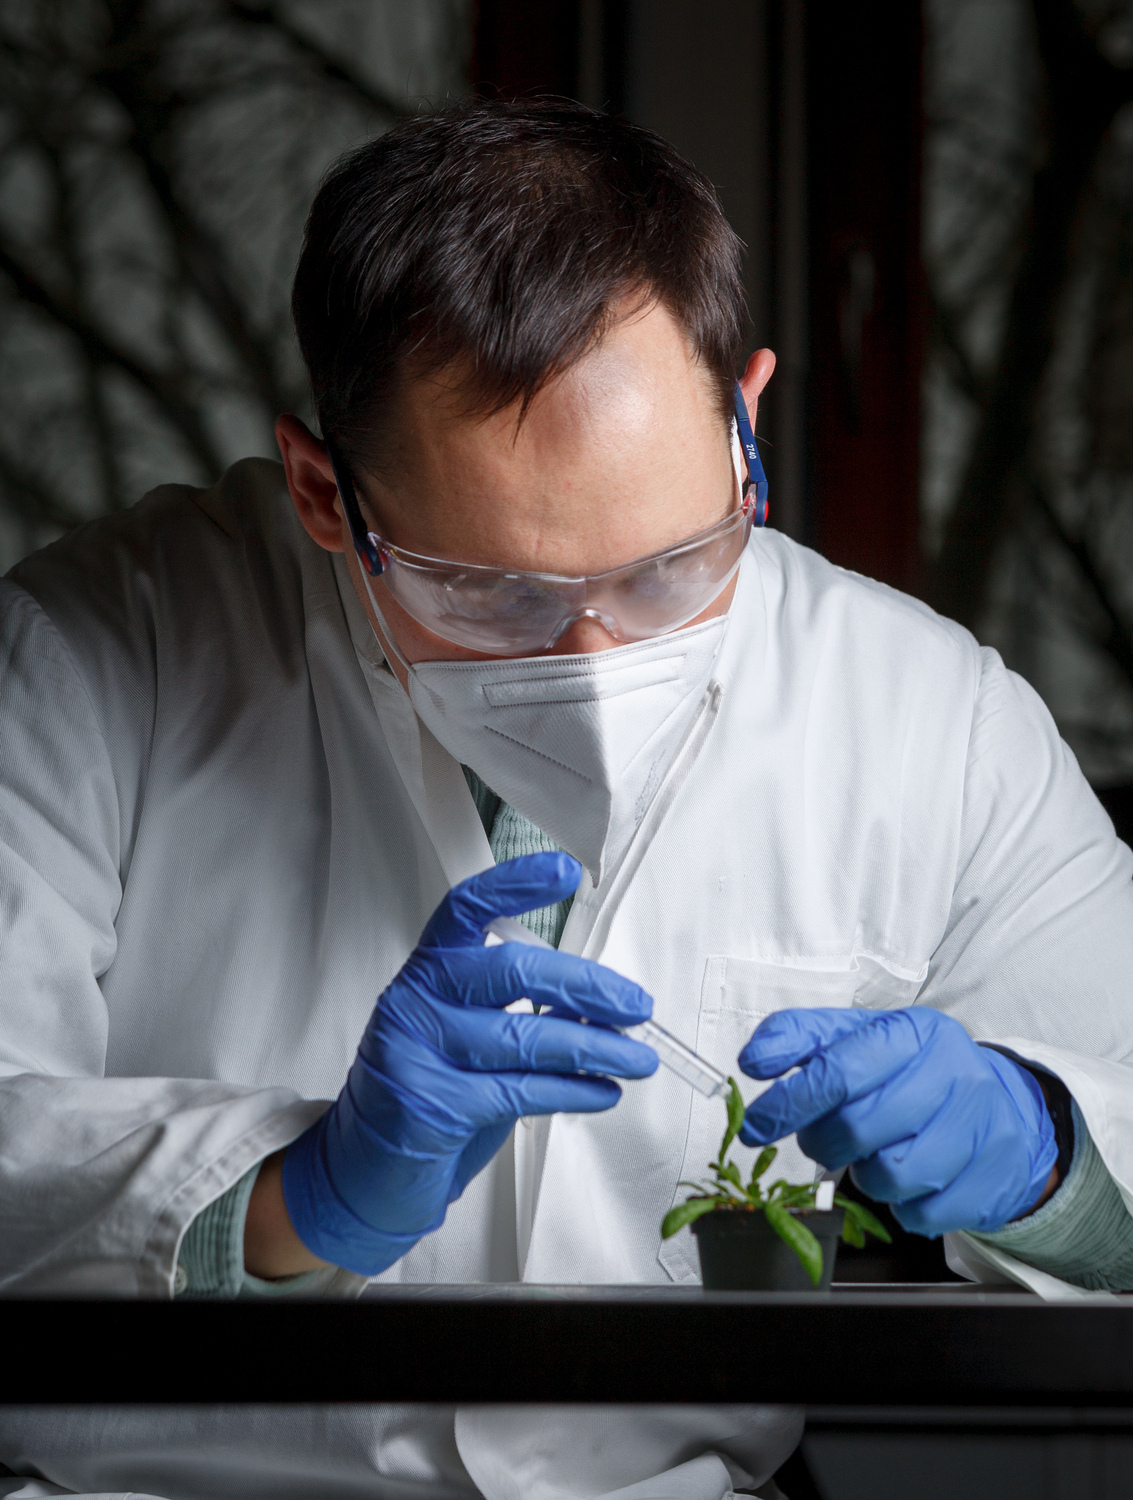 The leaf material serves as a basis for metabolite analysis